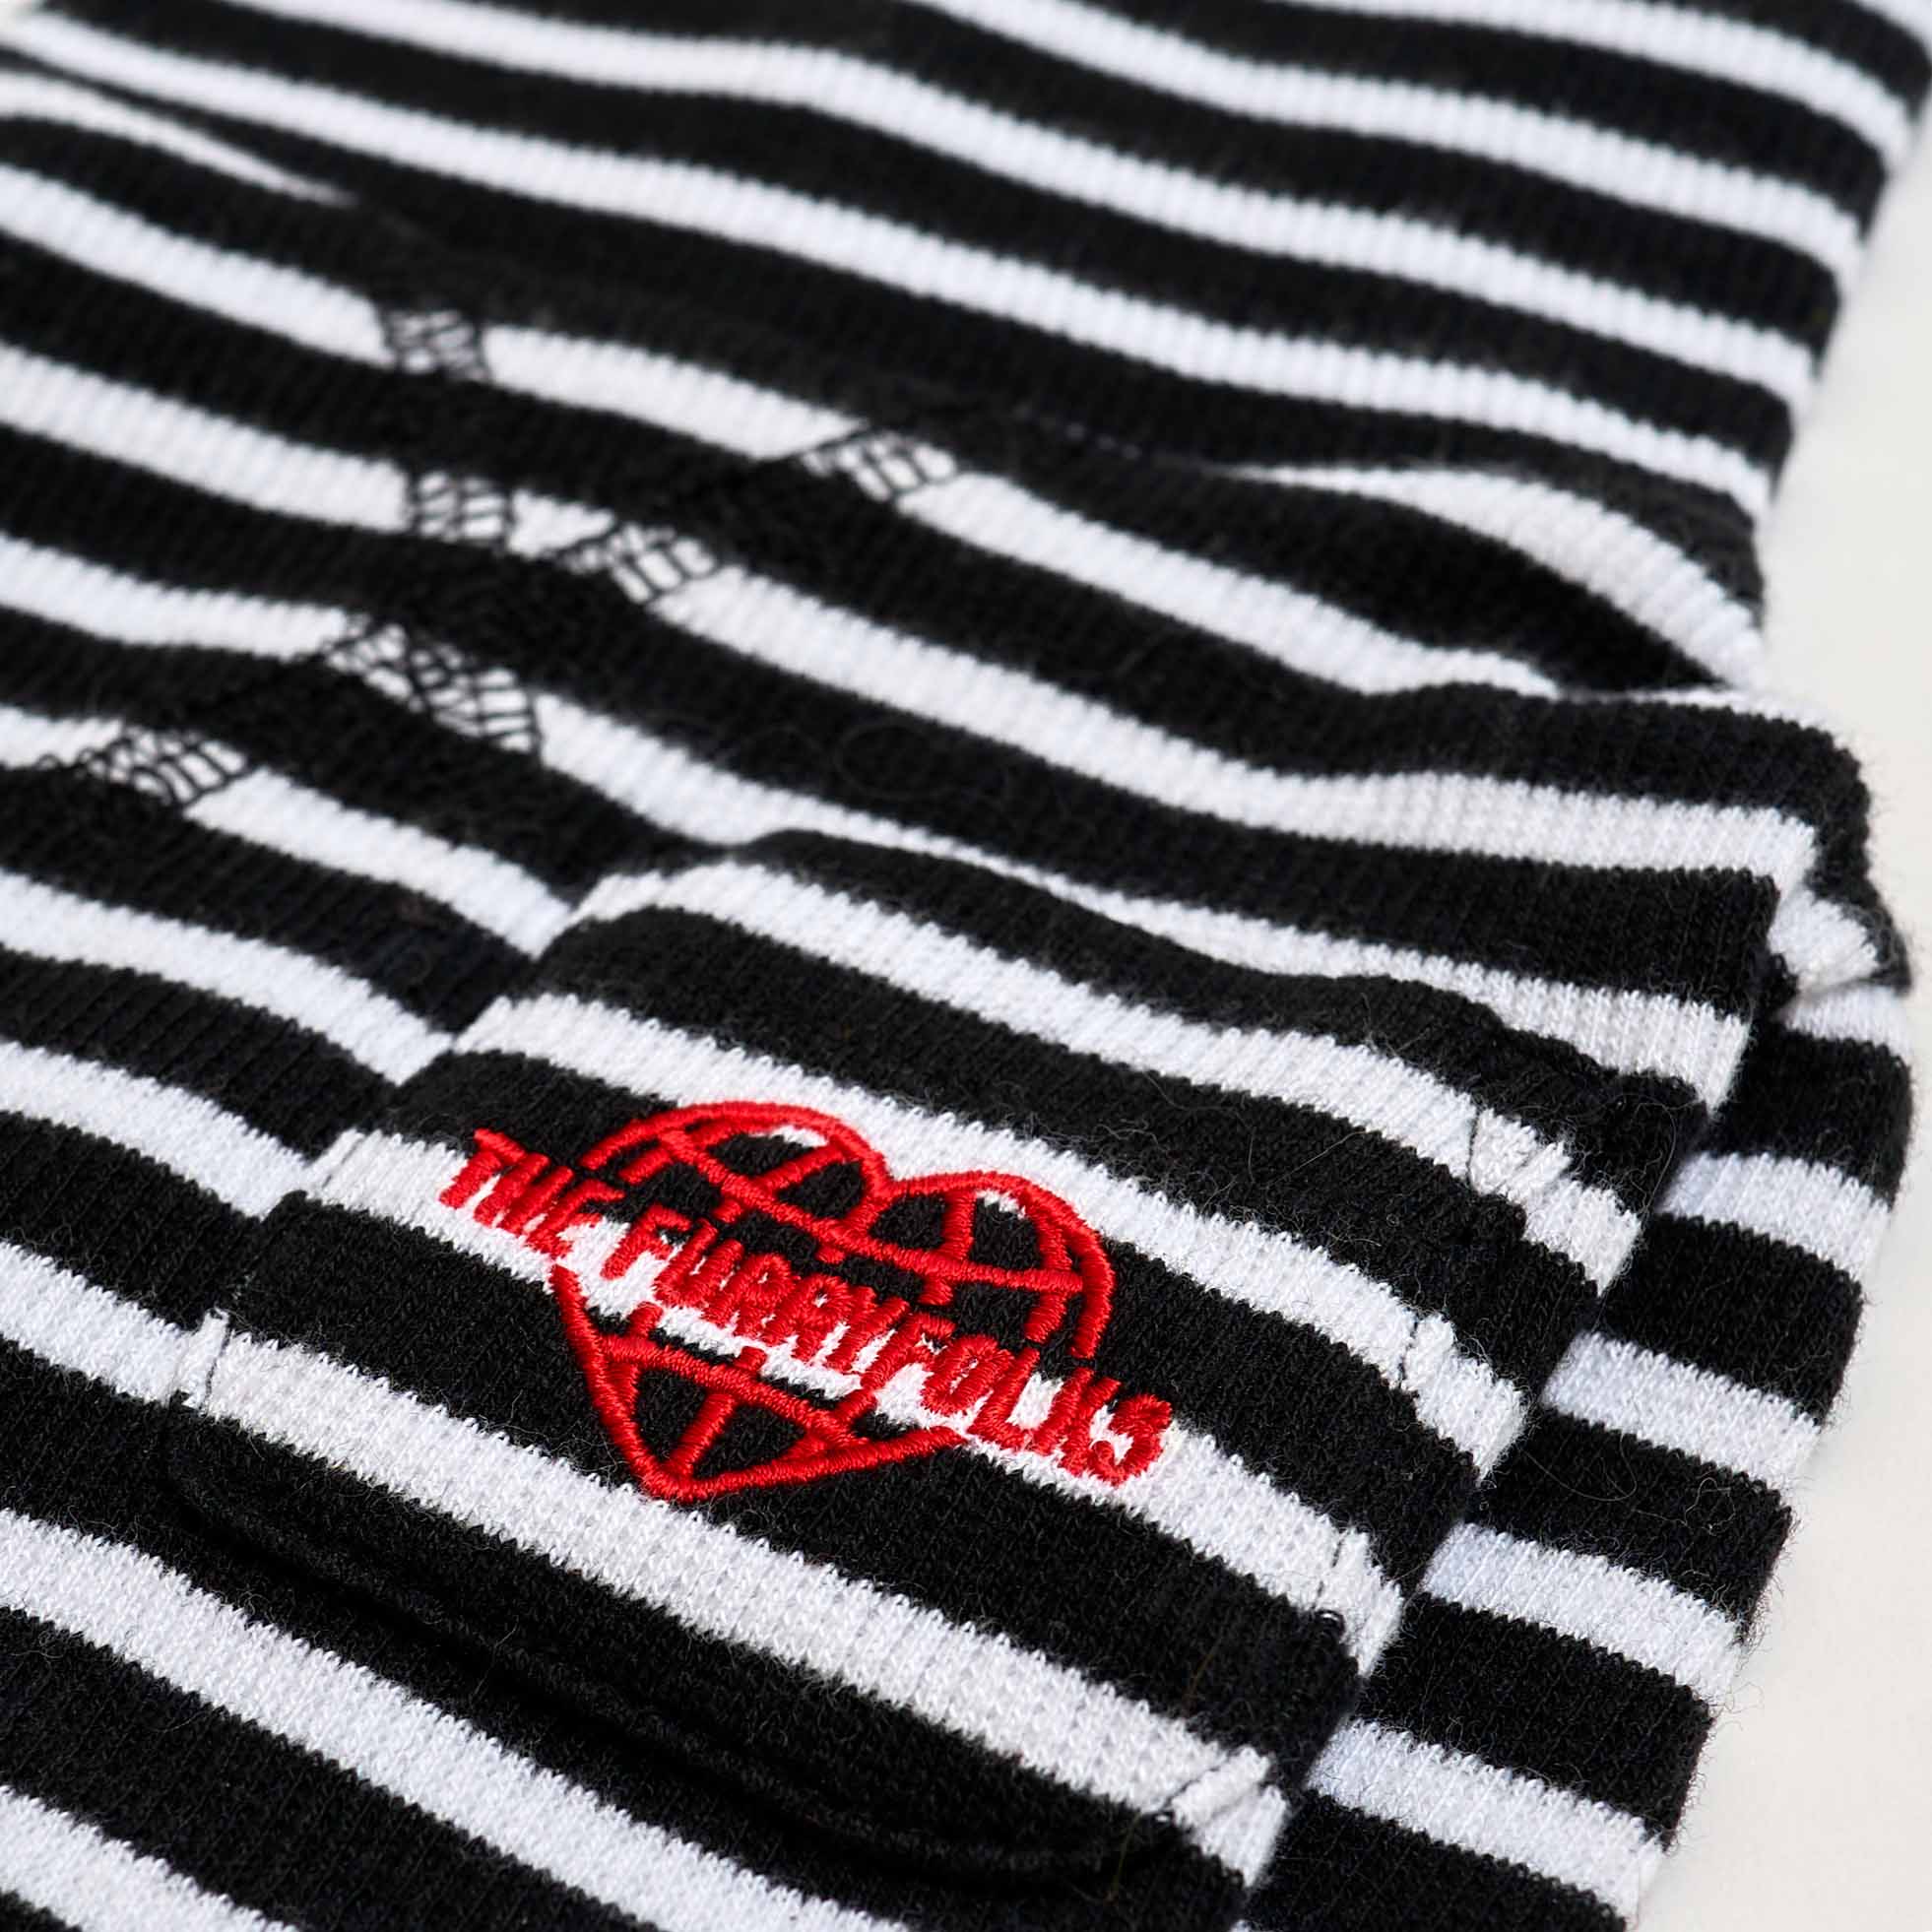 Close-up of a black and white striped dog shirt sleeve featuring a red heart and 'THE FURRYFOLKS' logo embroidery.